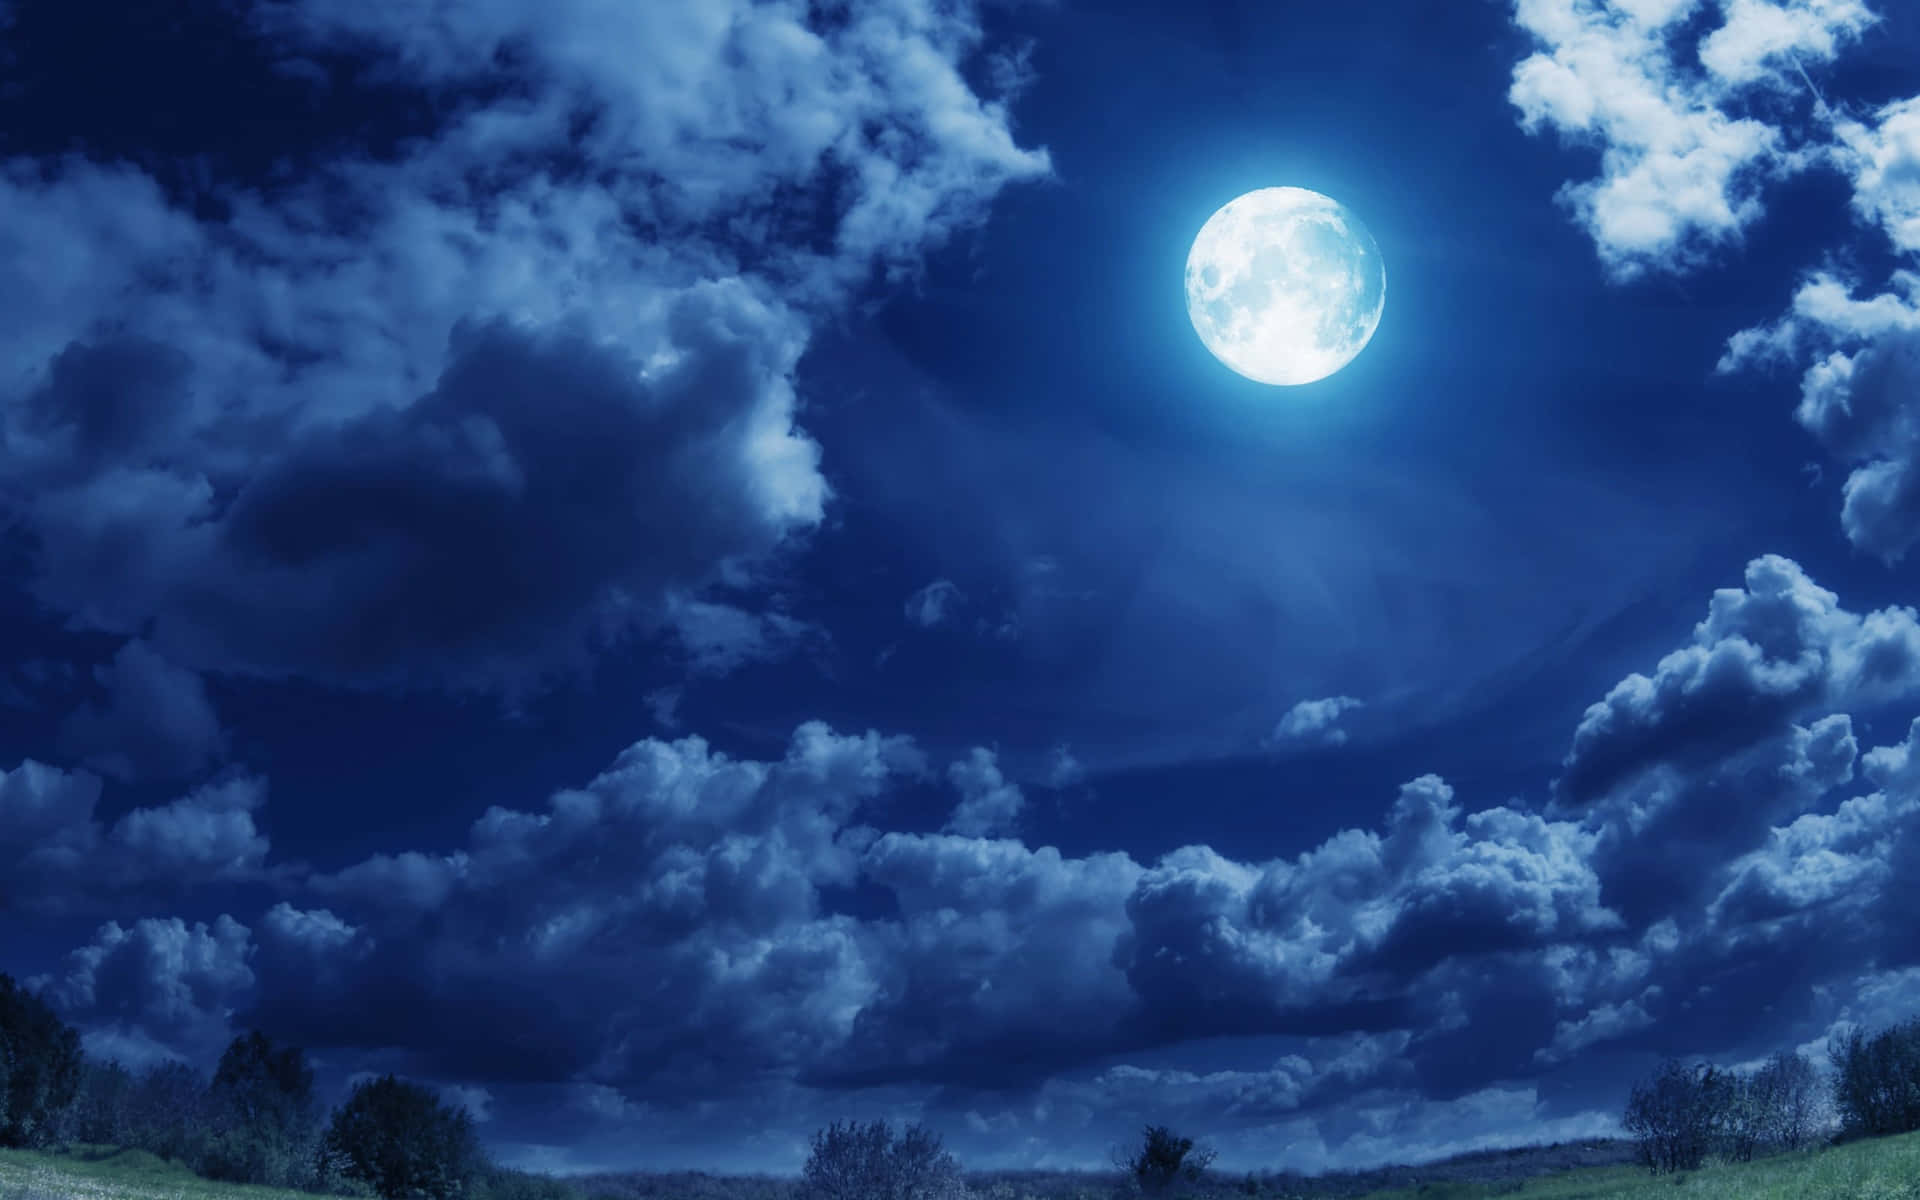 A Full Moon Is Seen In The Sky With Clouds